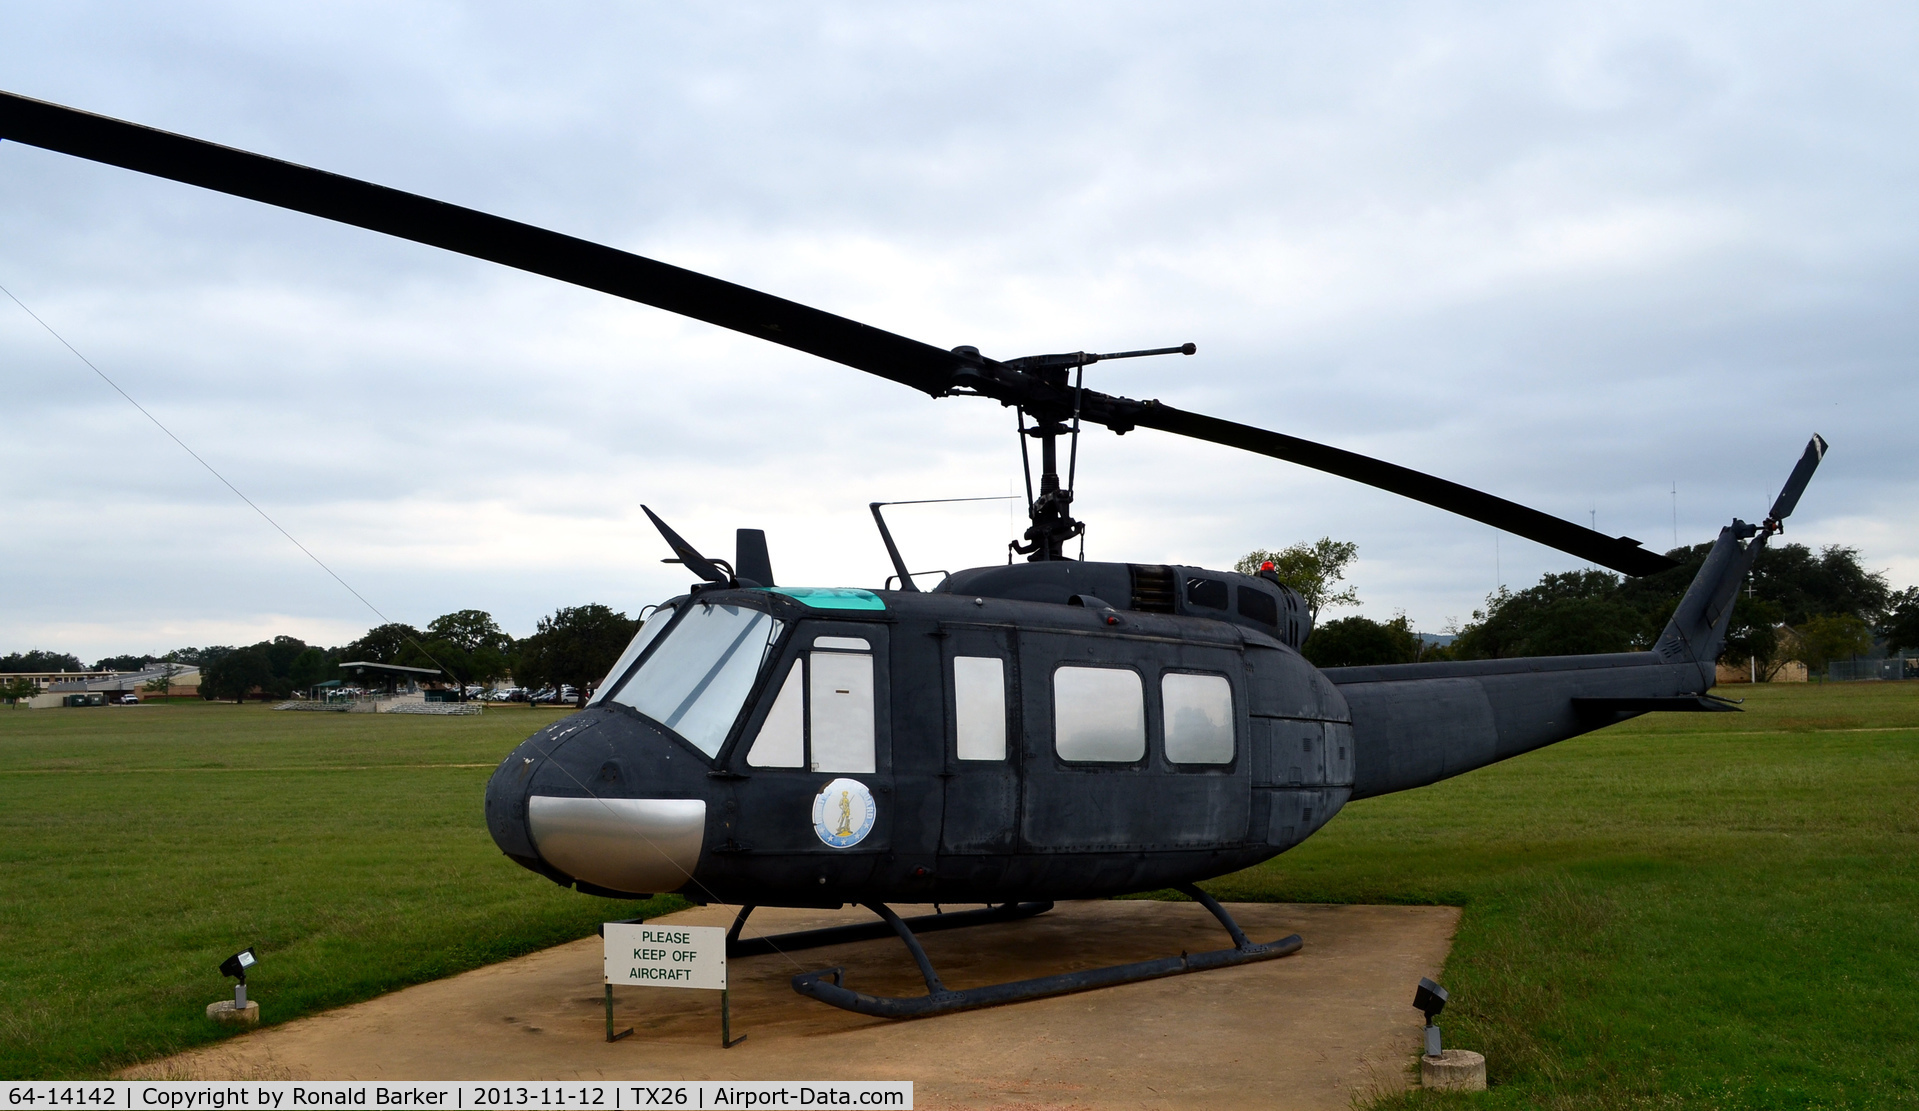 64-14142, 1964 Bell UH-1M Iroquois C/N 1266, UH-1M shown as 16189, Camp Mabry, TX